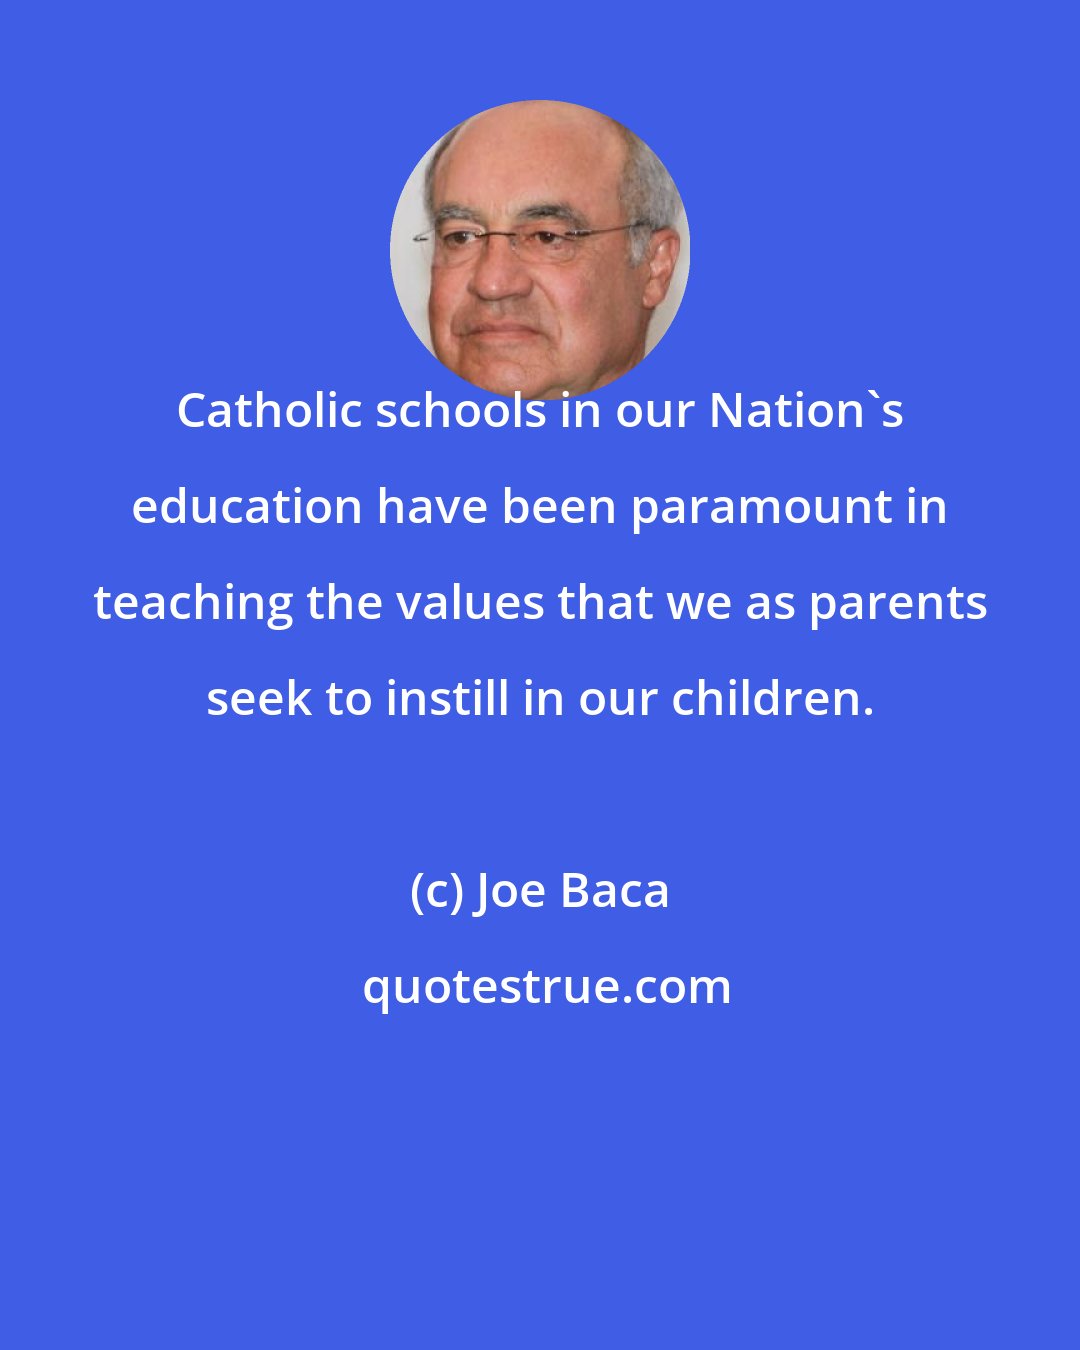 Joe Baca: Catholic schools in our Nation's education have been paramount in teaching the values that we as parents seek to instill in our children.